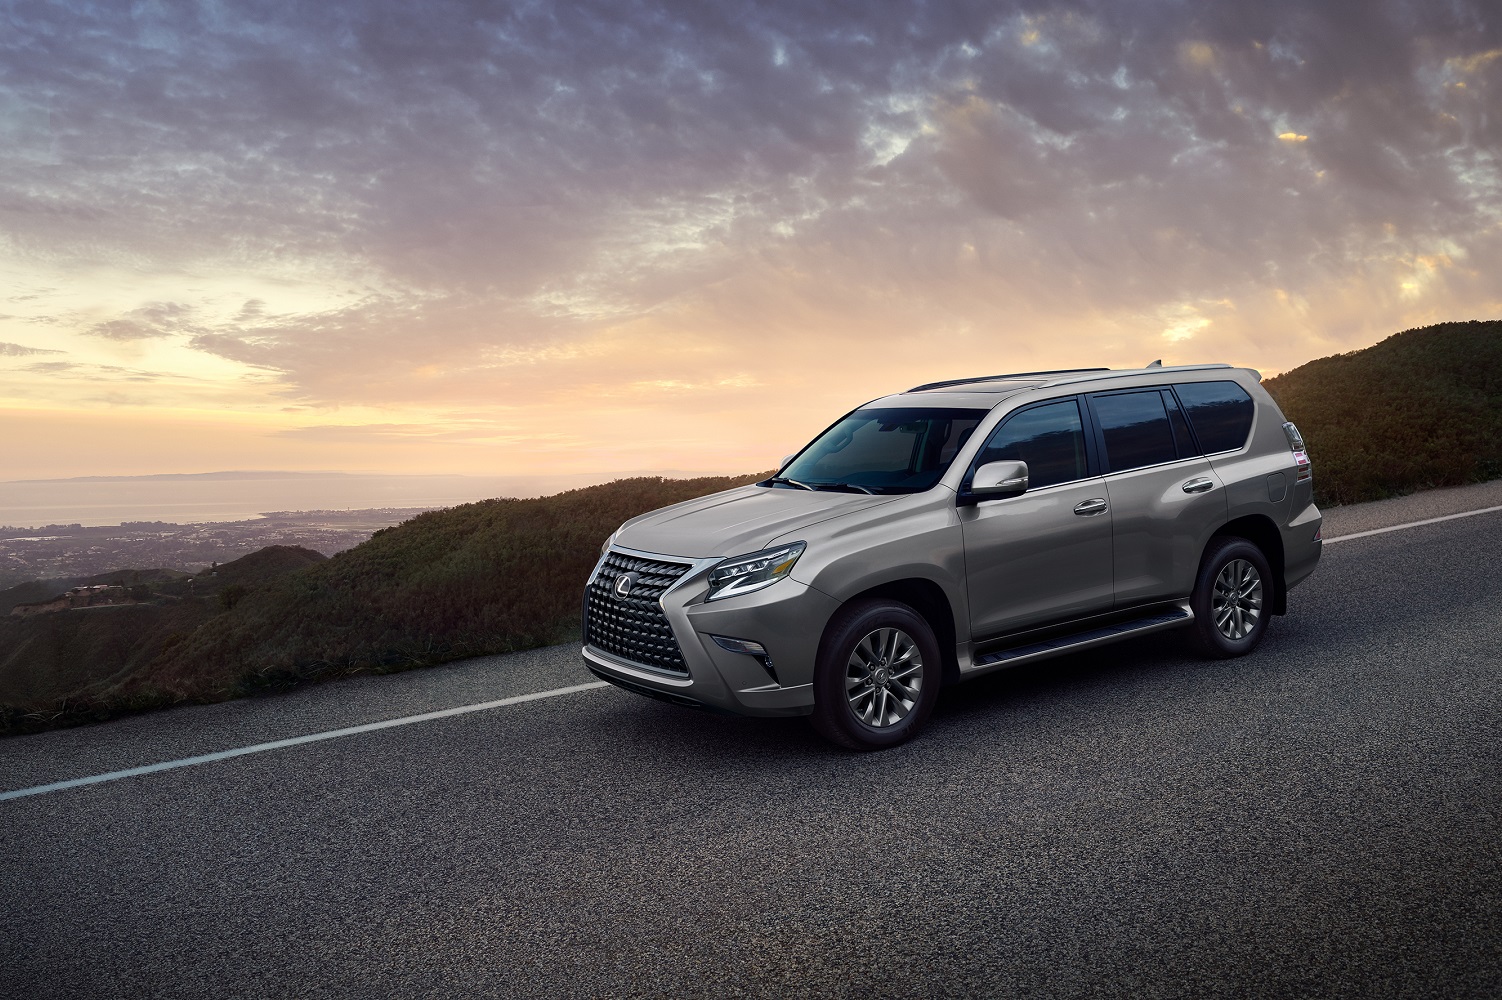 2020 lexus gx 460 gets more on and off road tech features gxg 0046 dc081173d88ad97591b8829860142f8fb65a1d52